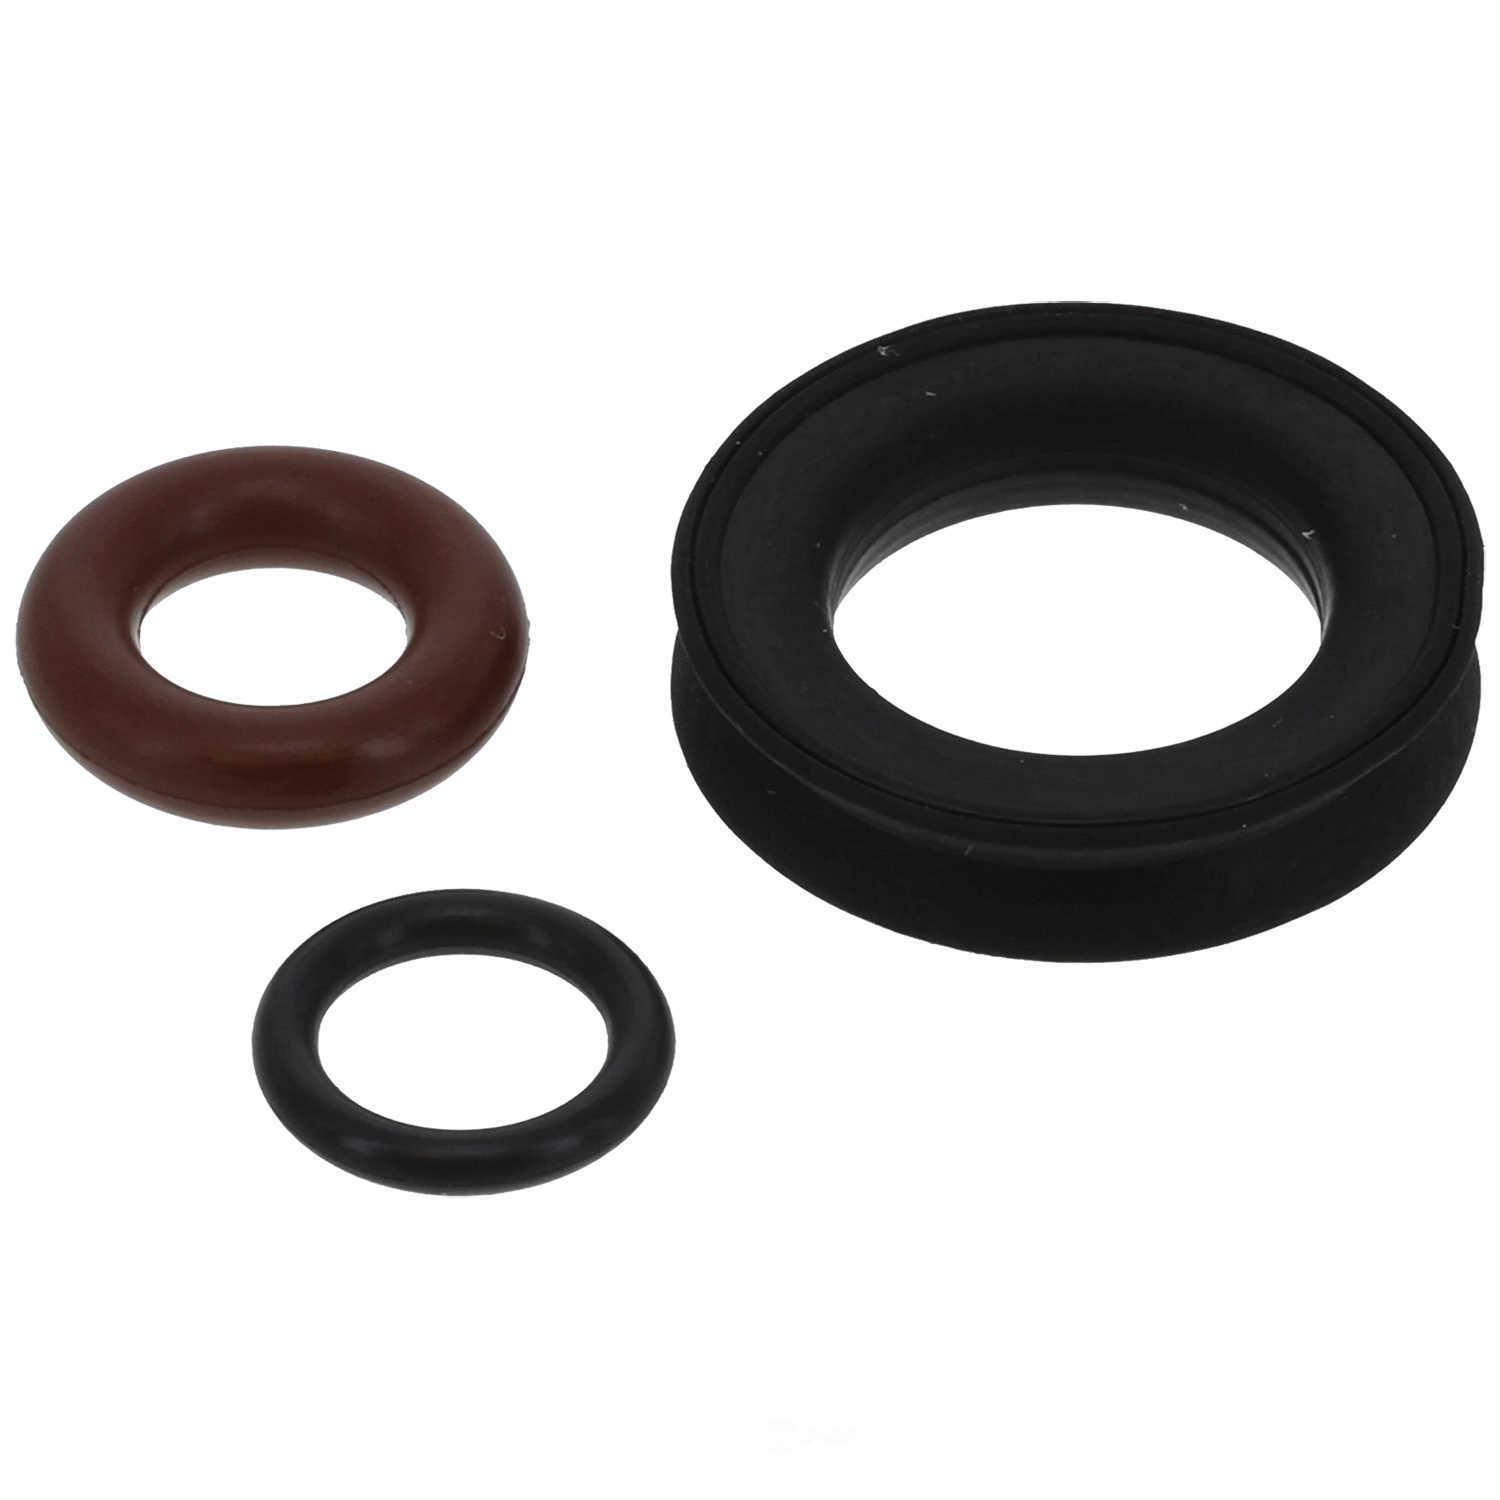 GB REMANUFACTURING INC. - Fuel Injector Seal Kit - GBR 8-039